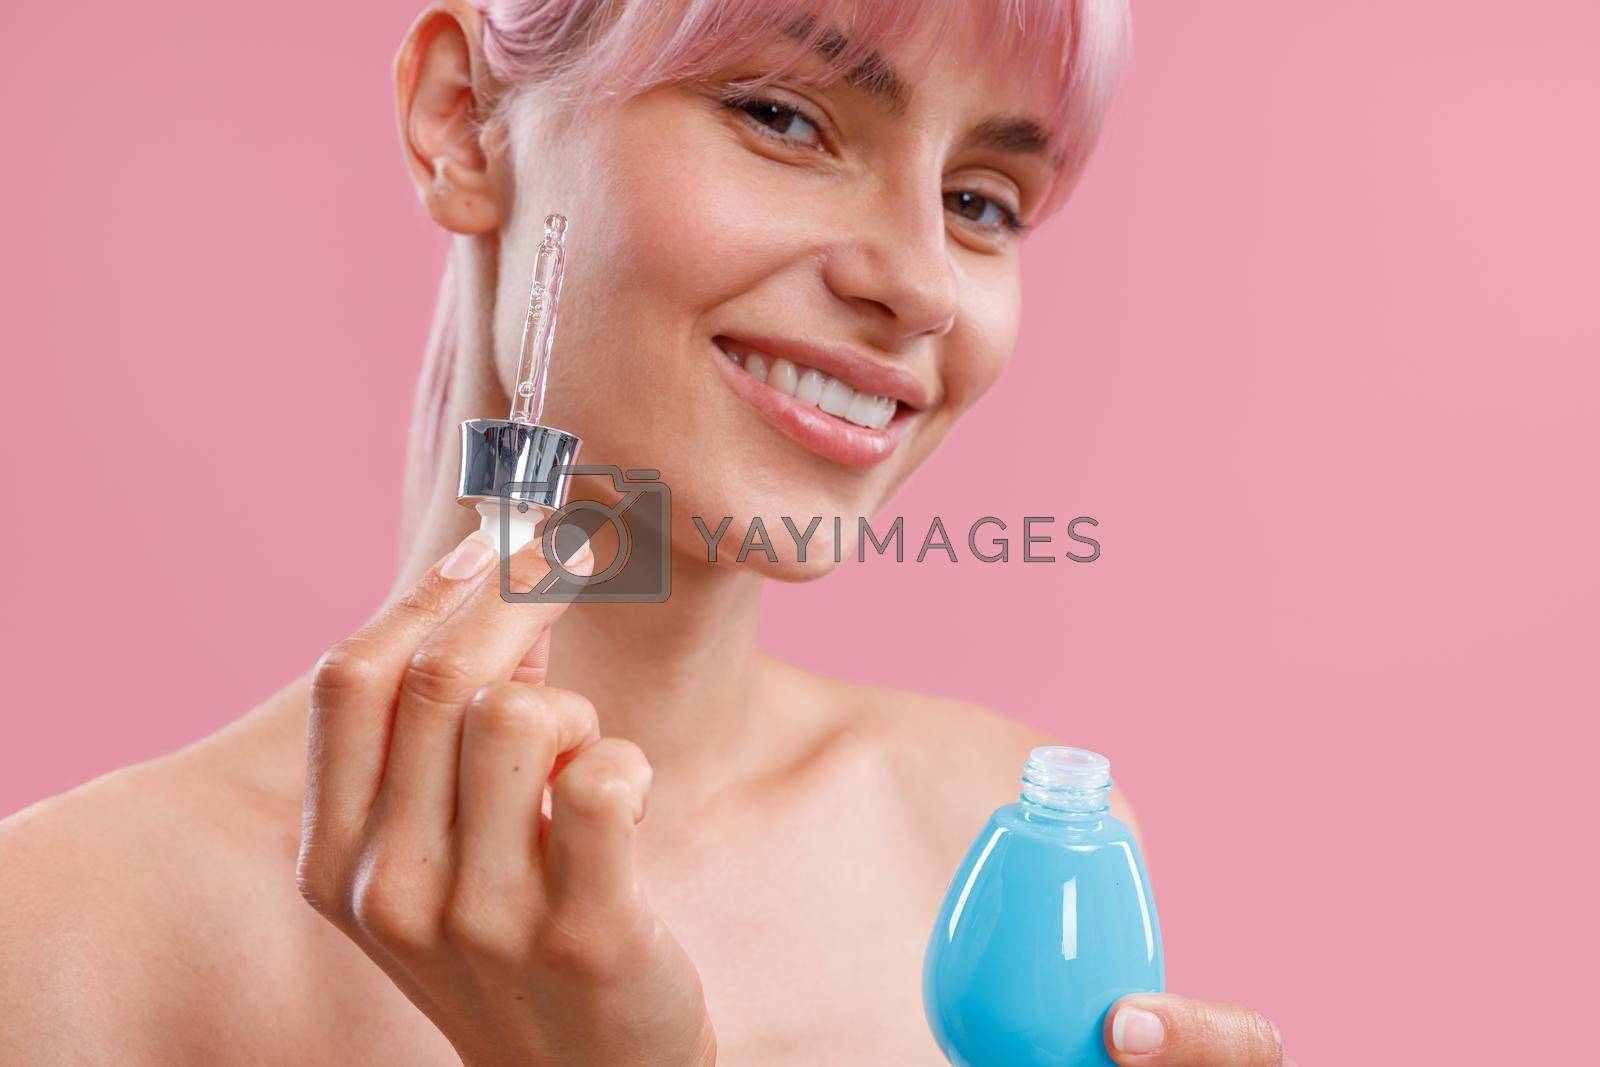 Royalty free image of Portrait of young woman with pink hair holding dropper and a bottle of serum or hyaluronic acid, posing isolated over pink background by Yaroslav_astakhov